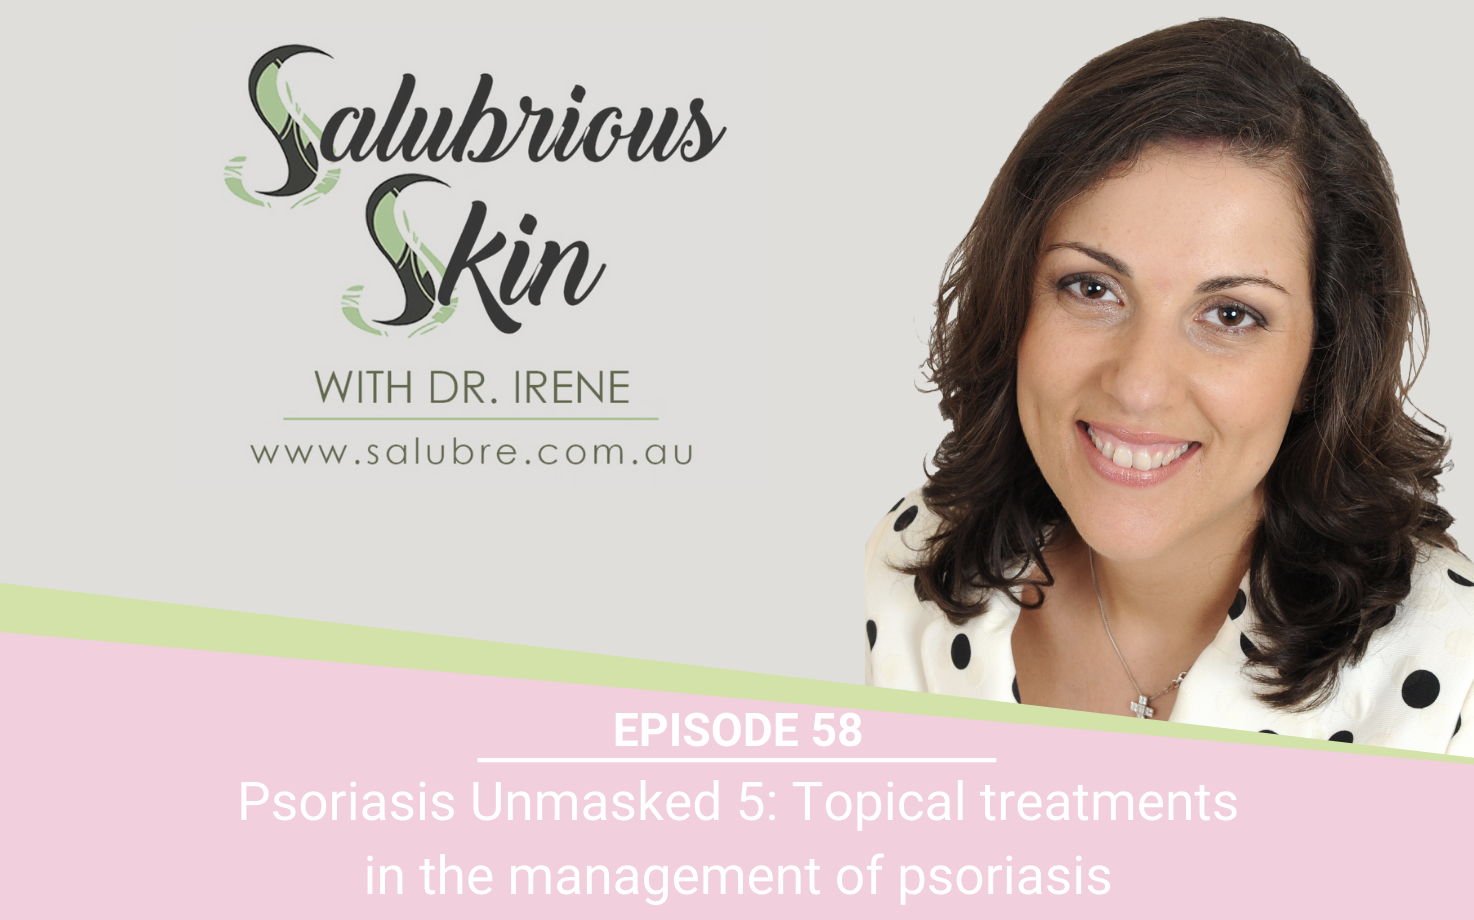 Podcast 58: Psoriasis Unmasked 5: Topical treatments essential in the management of psoriasis